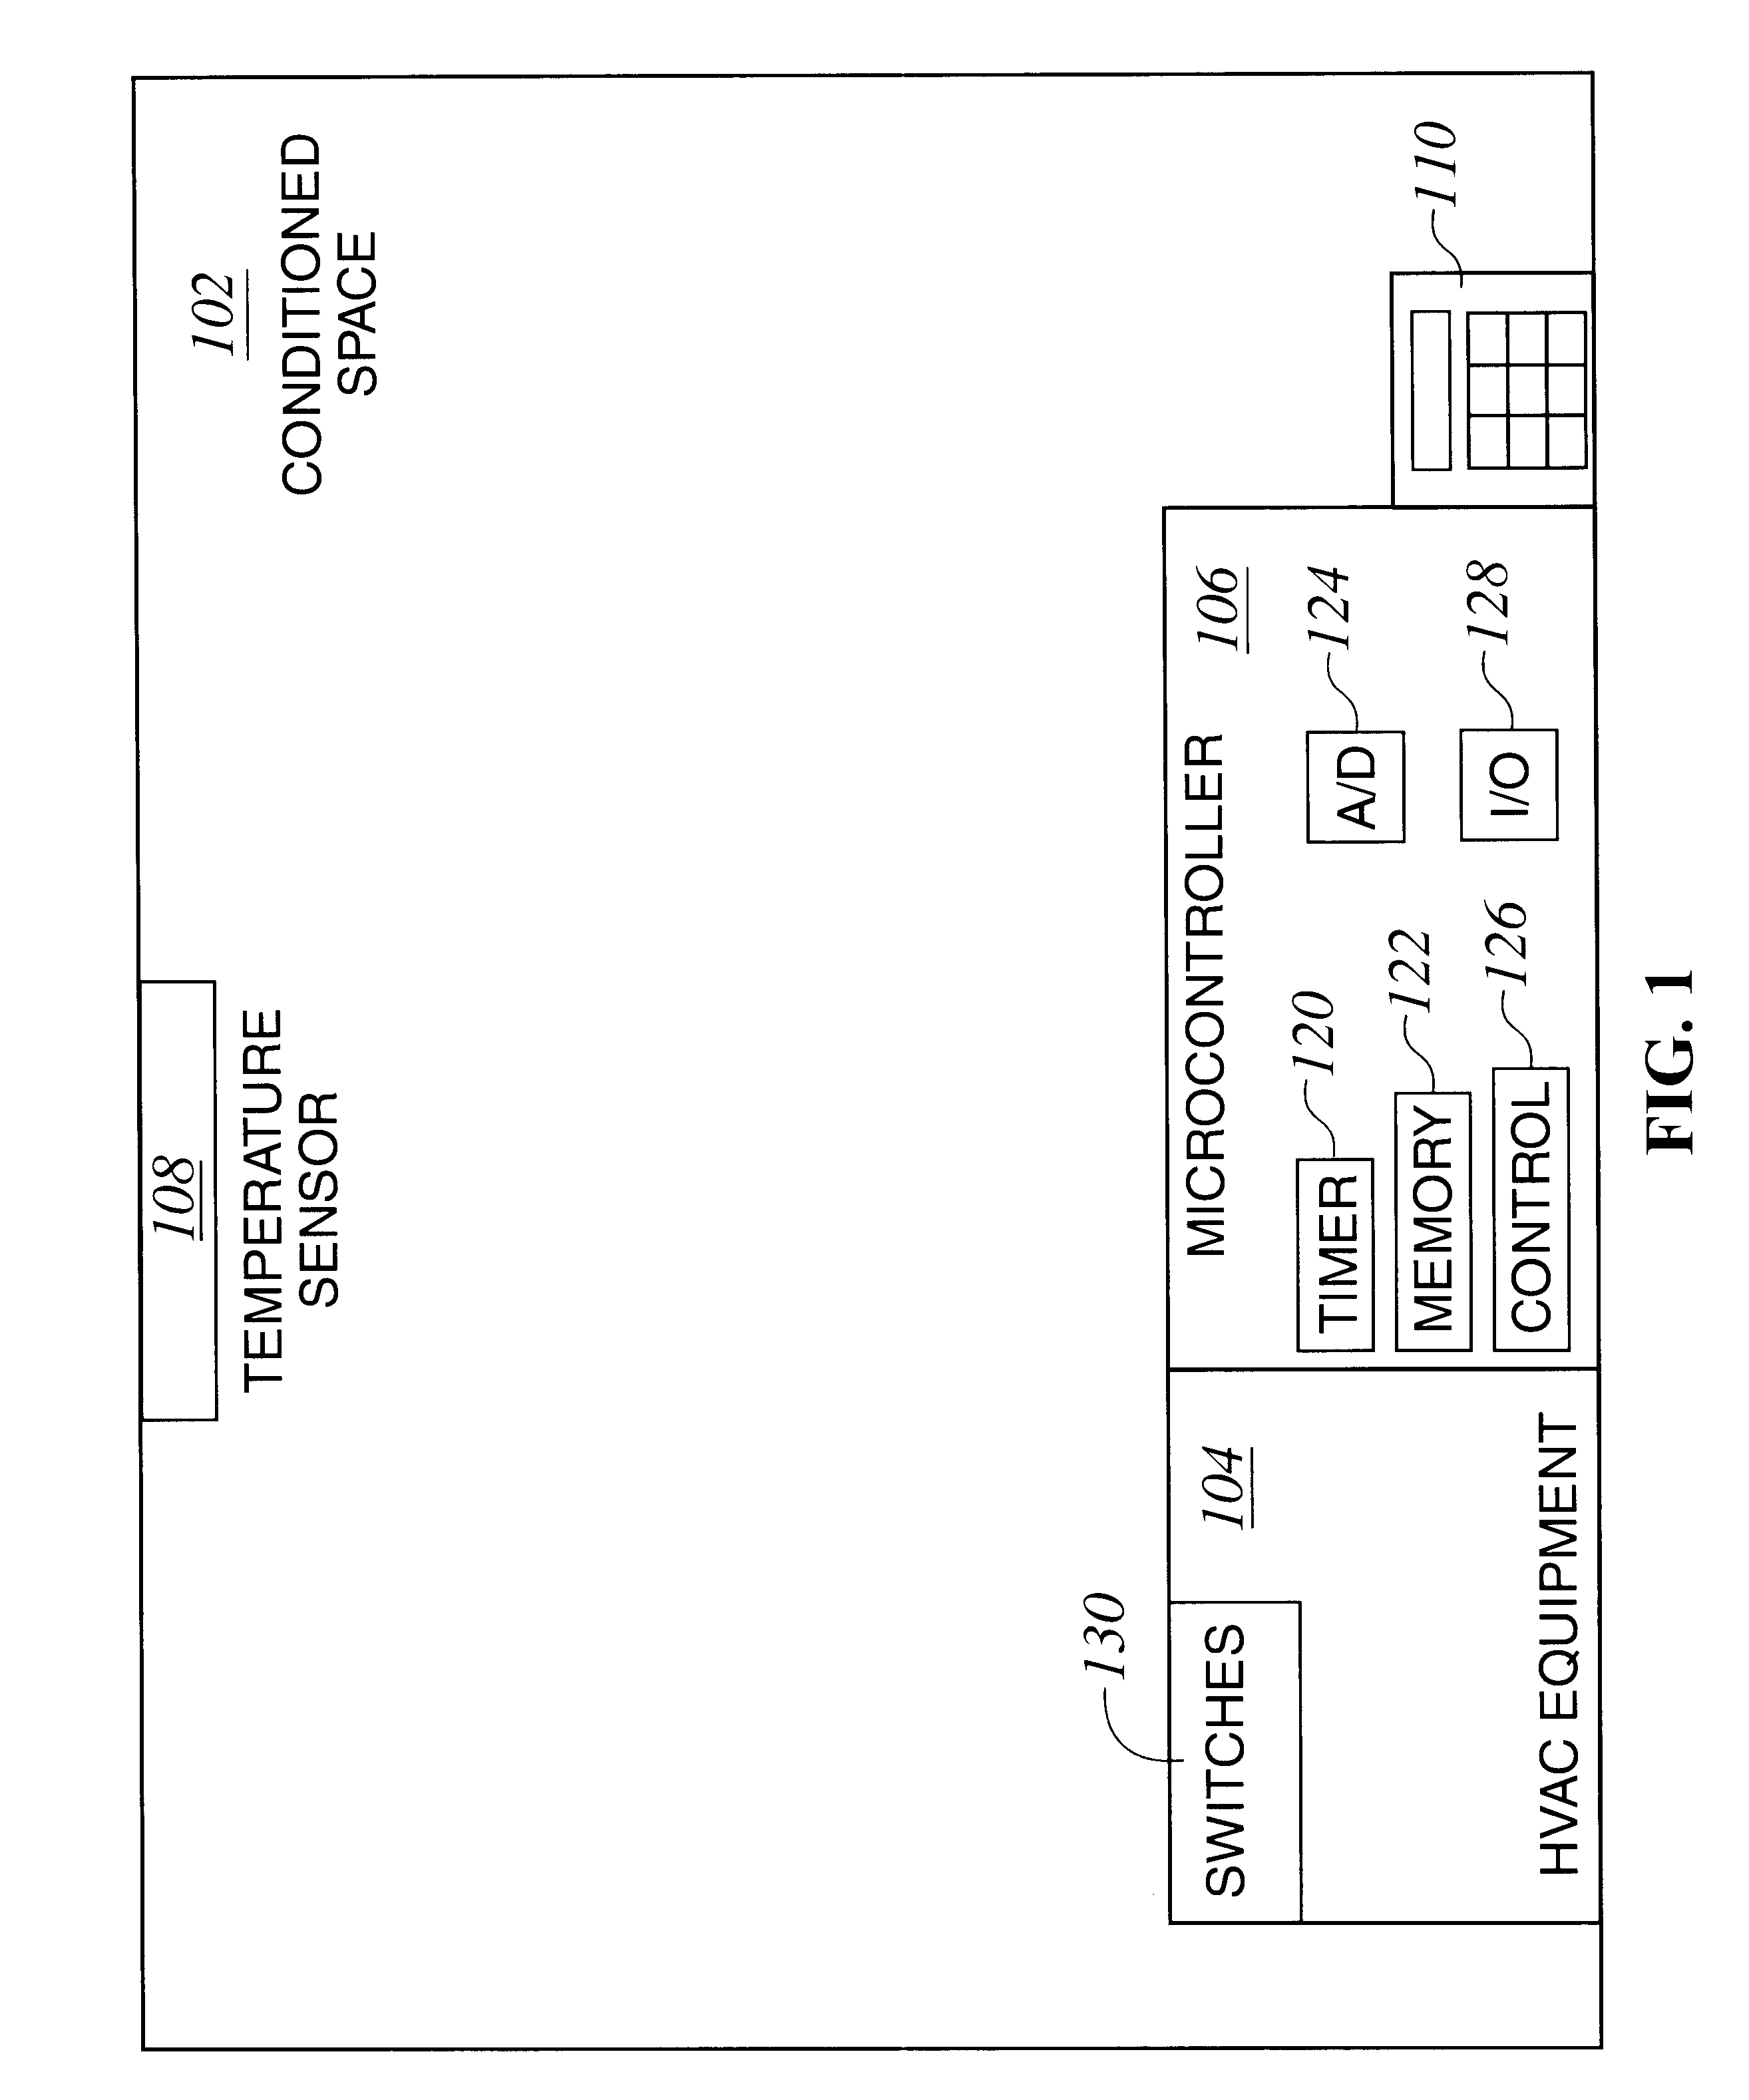 System and method for switching-over between heating and cooling modes